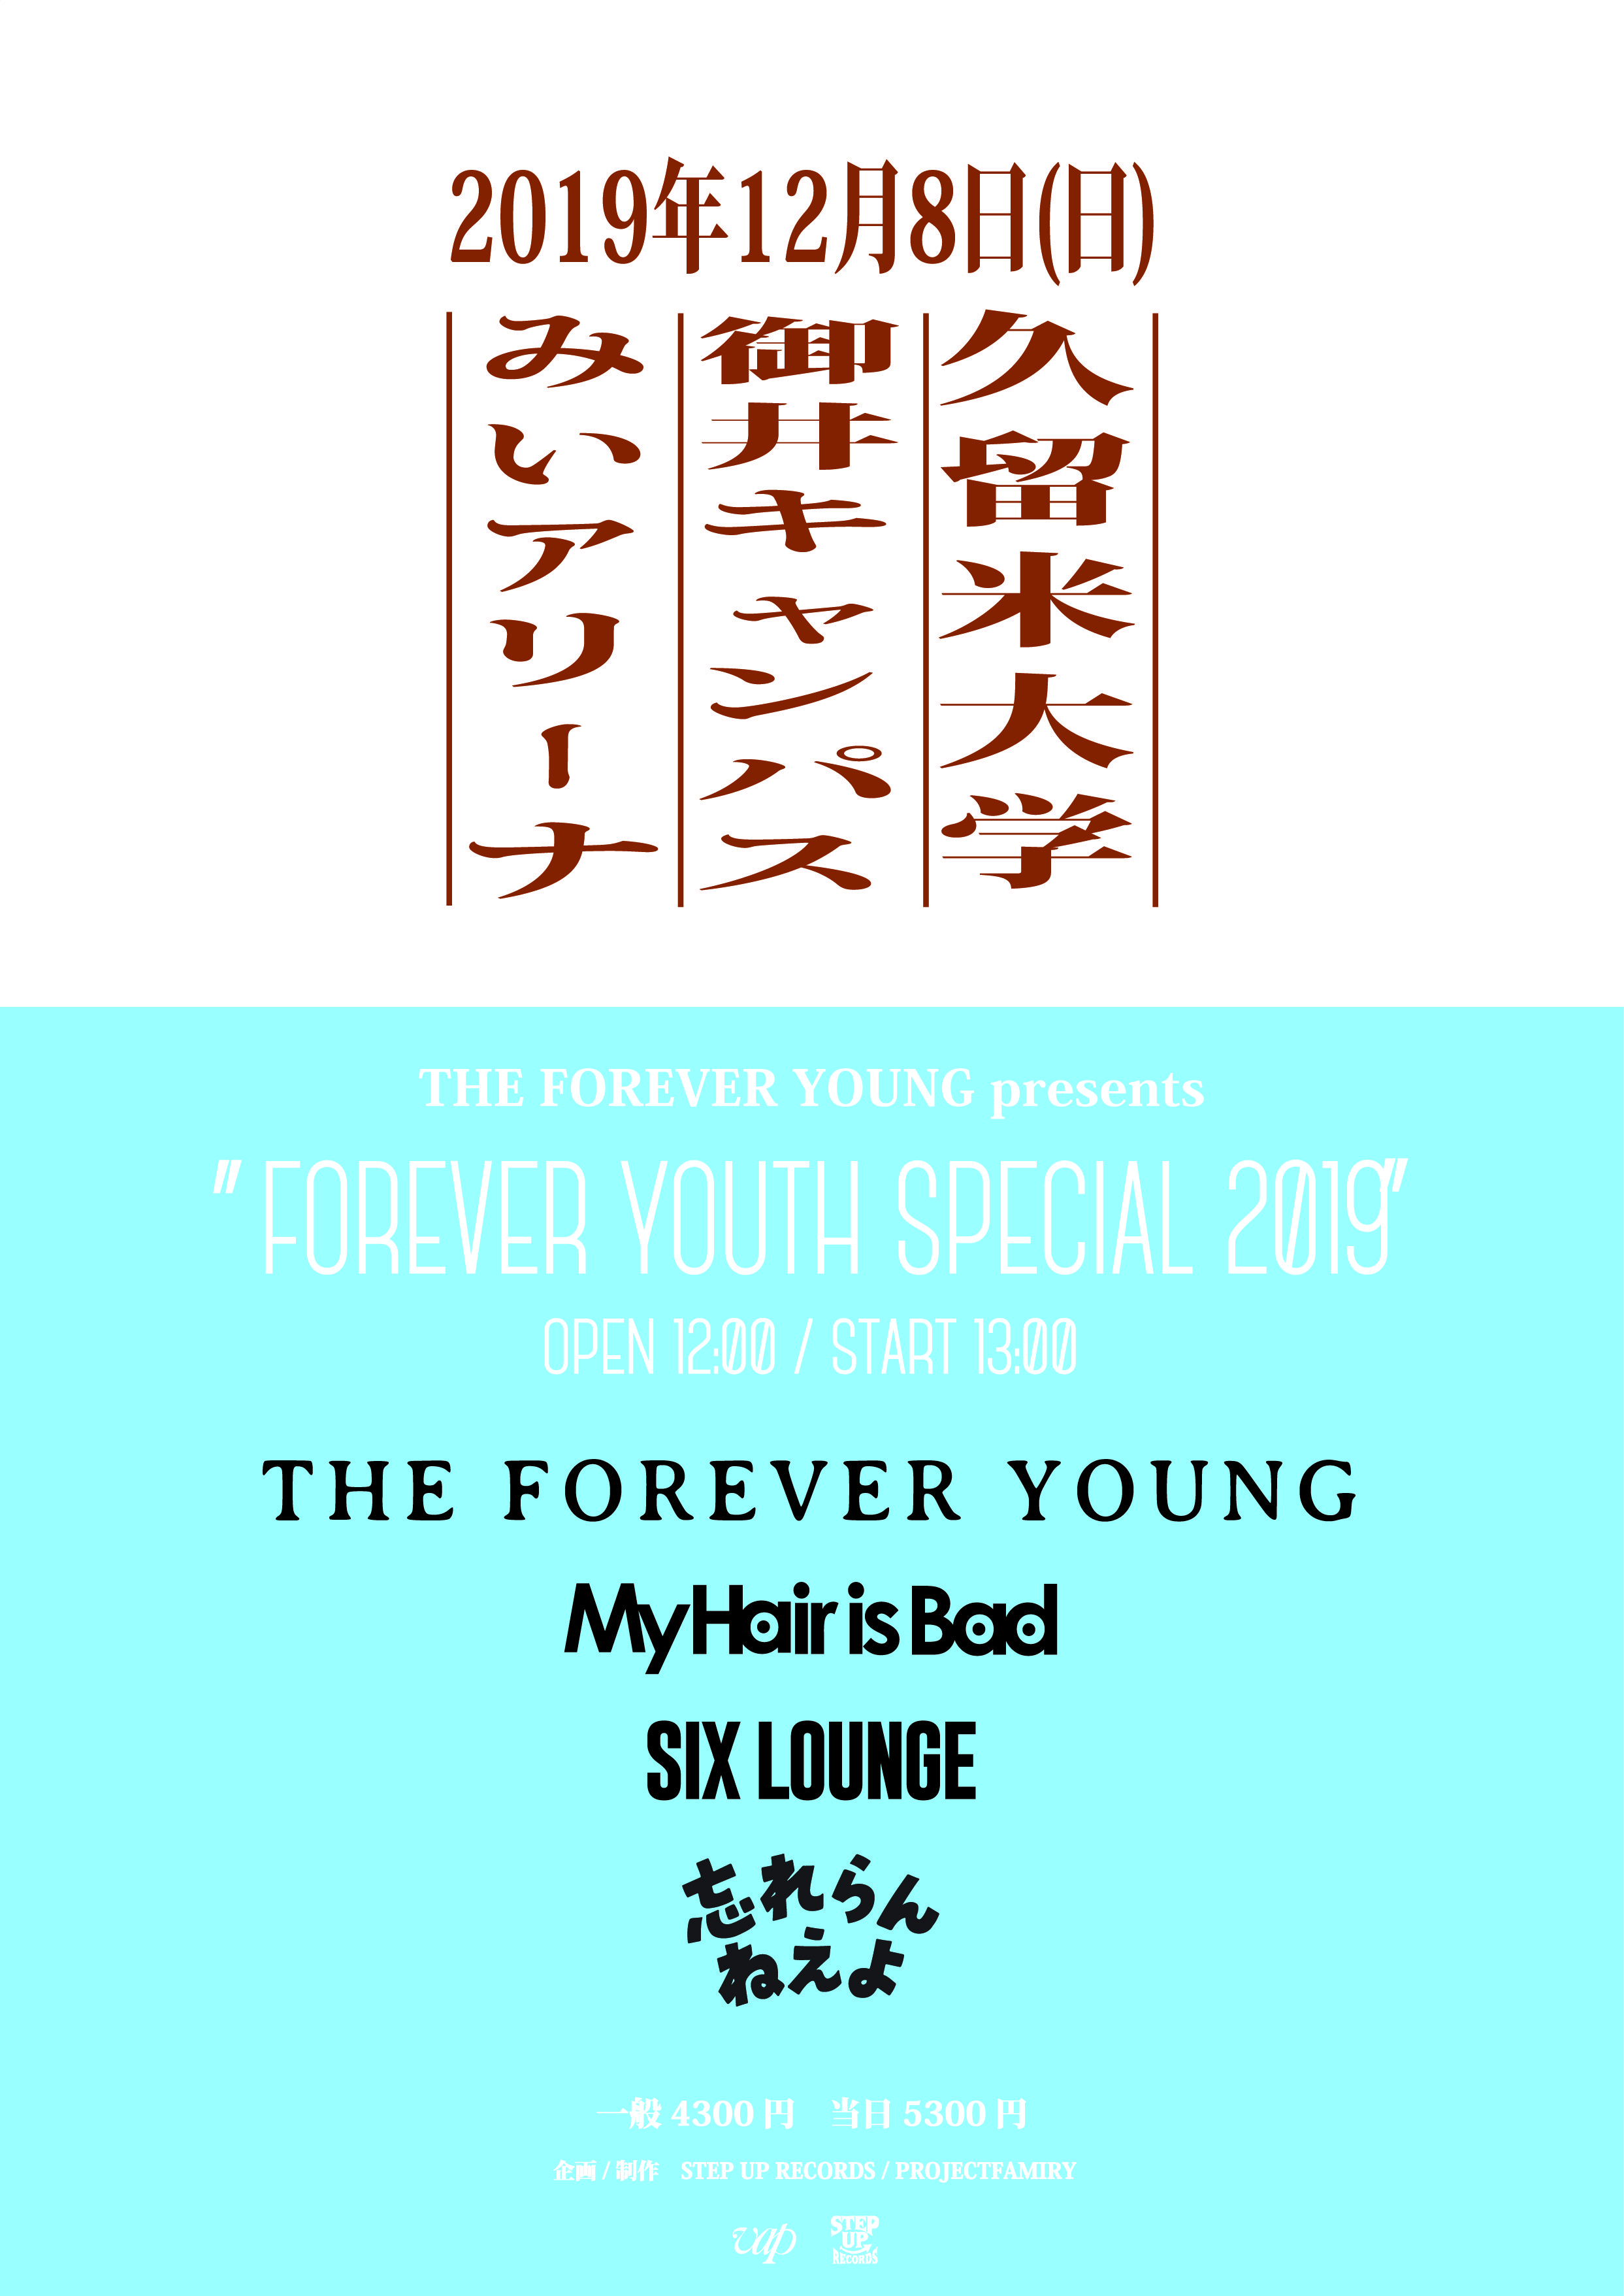 FOREVER YOUTH SPECIAL 2019